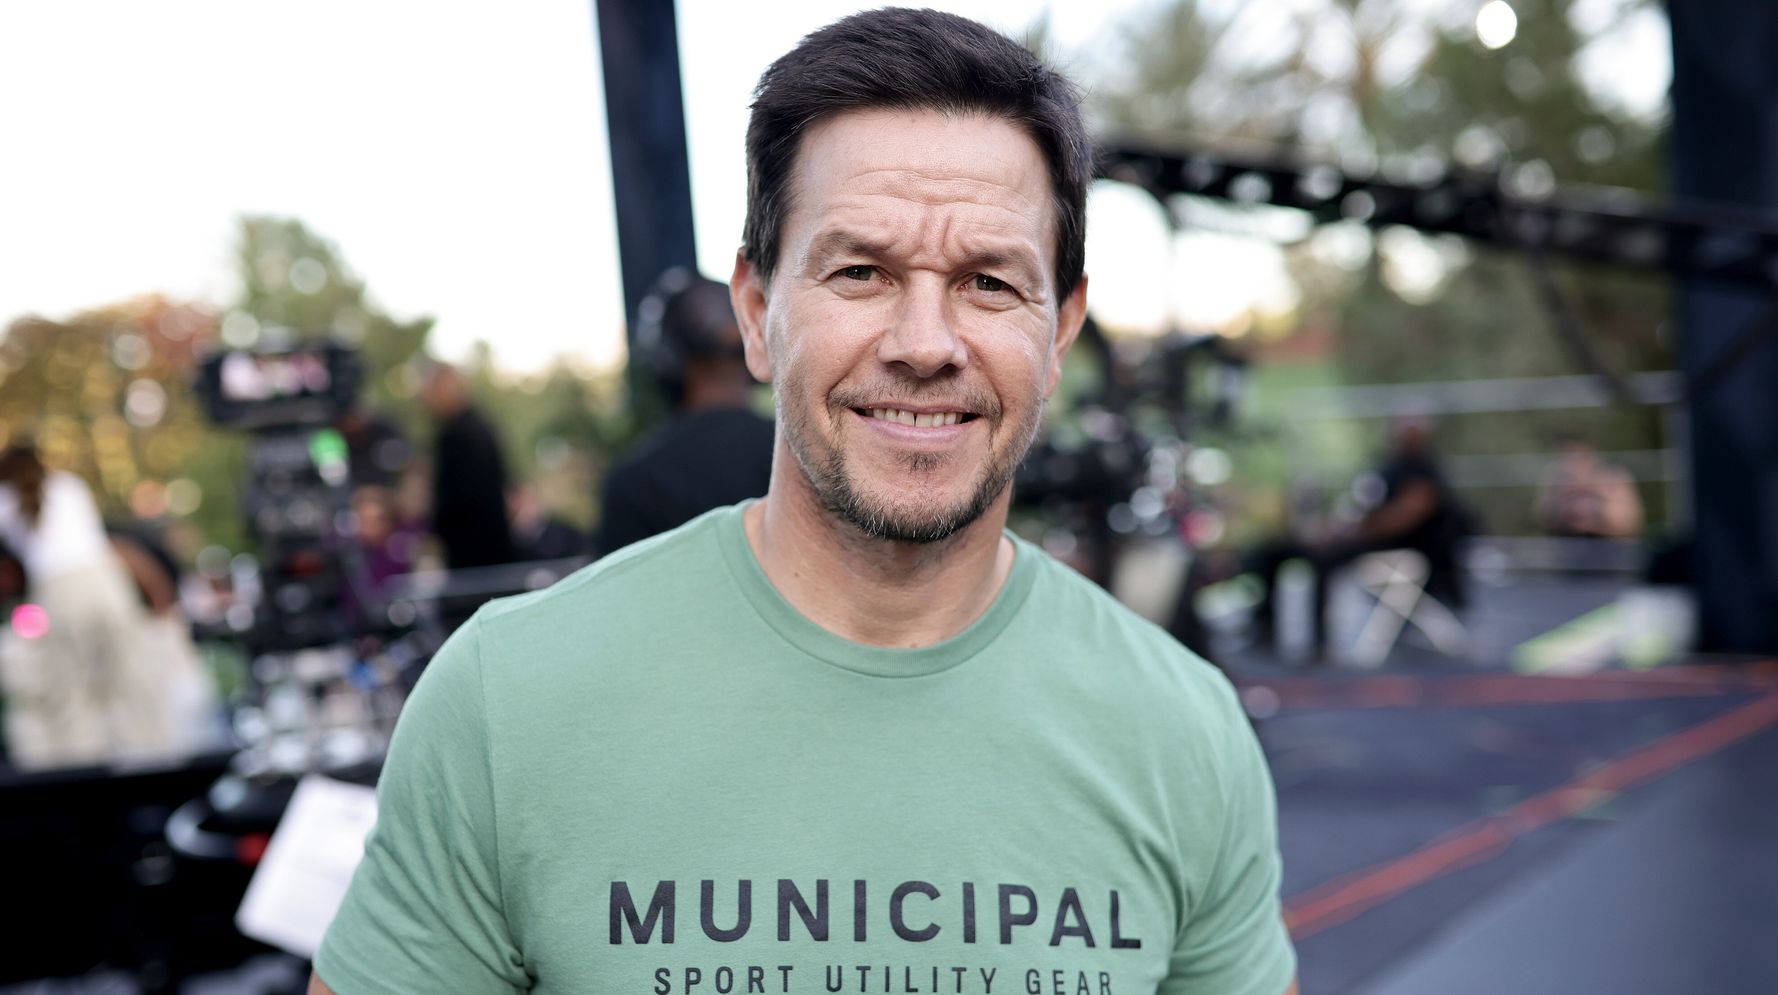 Mark Wahlberg on his action-comedy 'The Family Plan' and his dreams for  Hollywood 2.0 in Las Vegas - Las Vegas Sun News